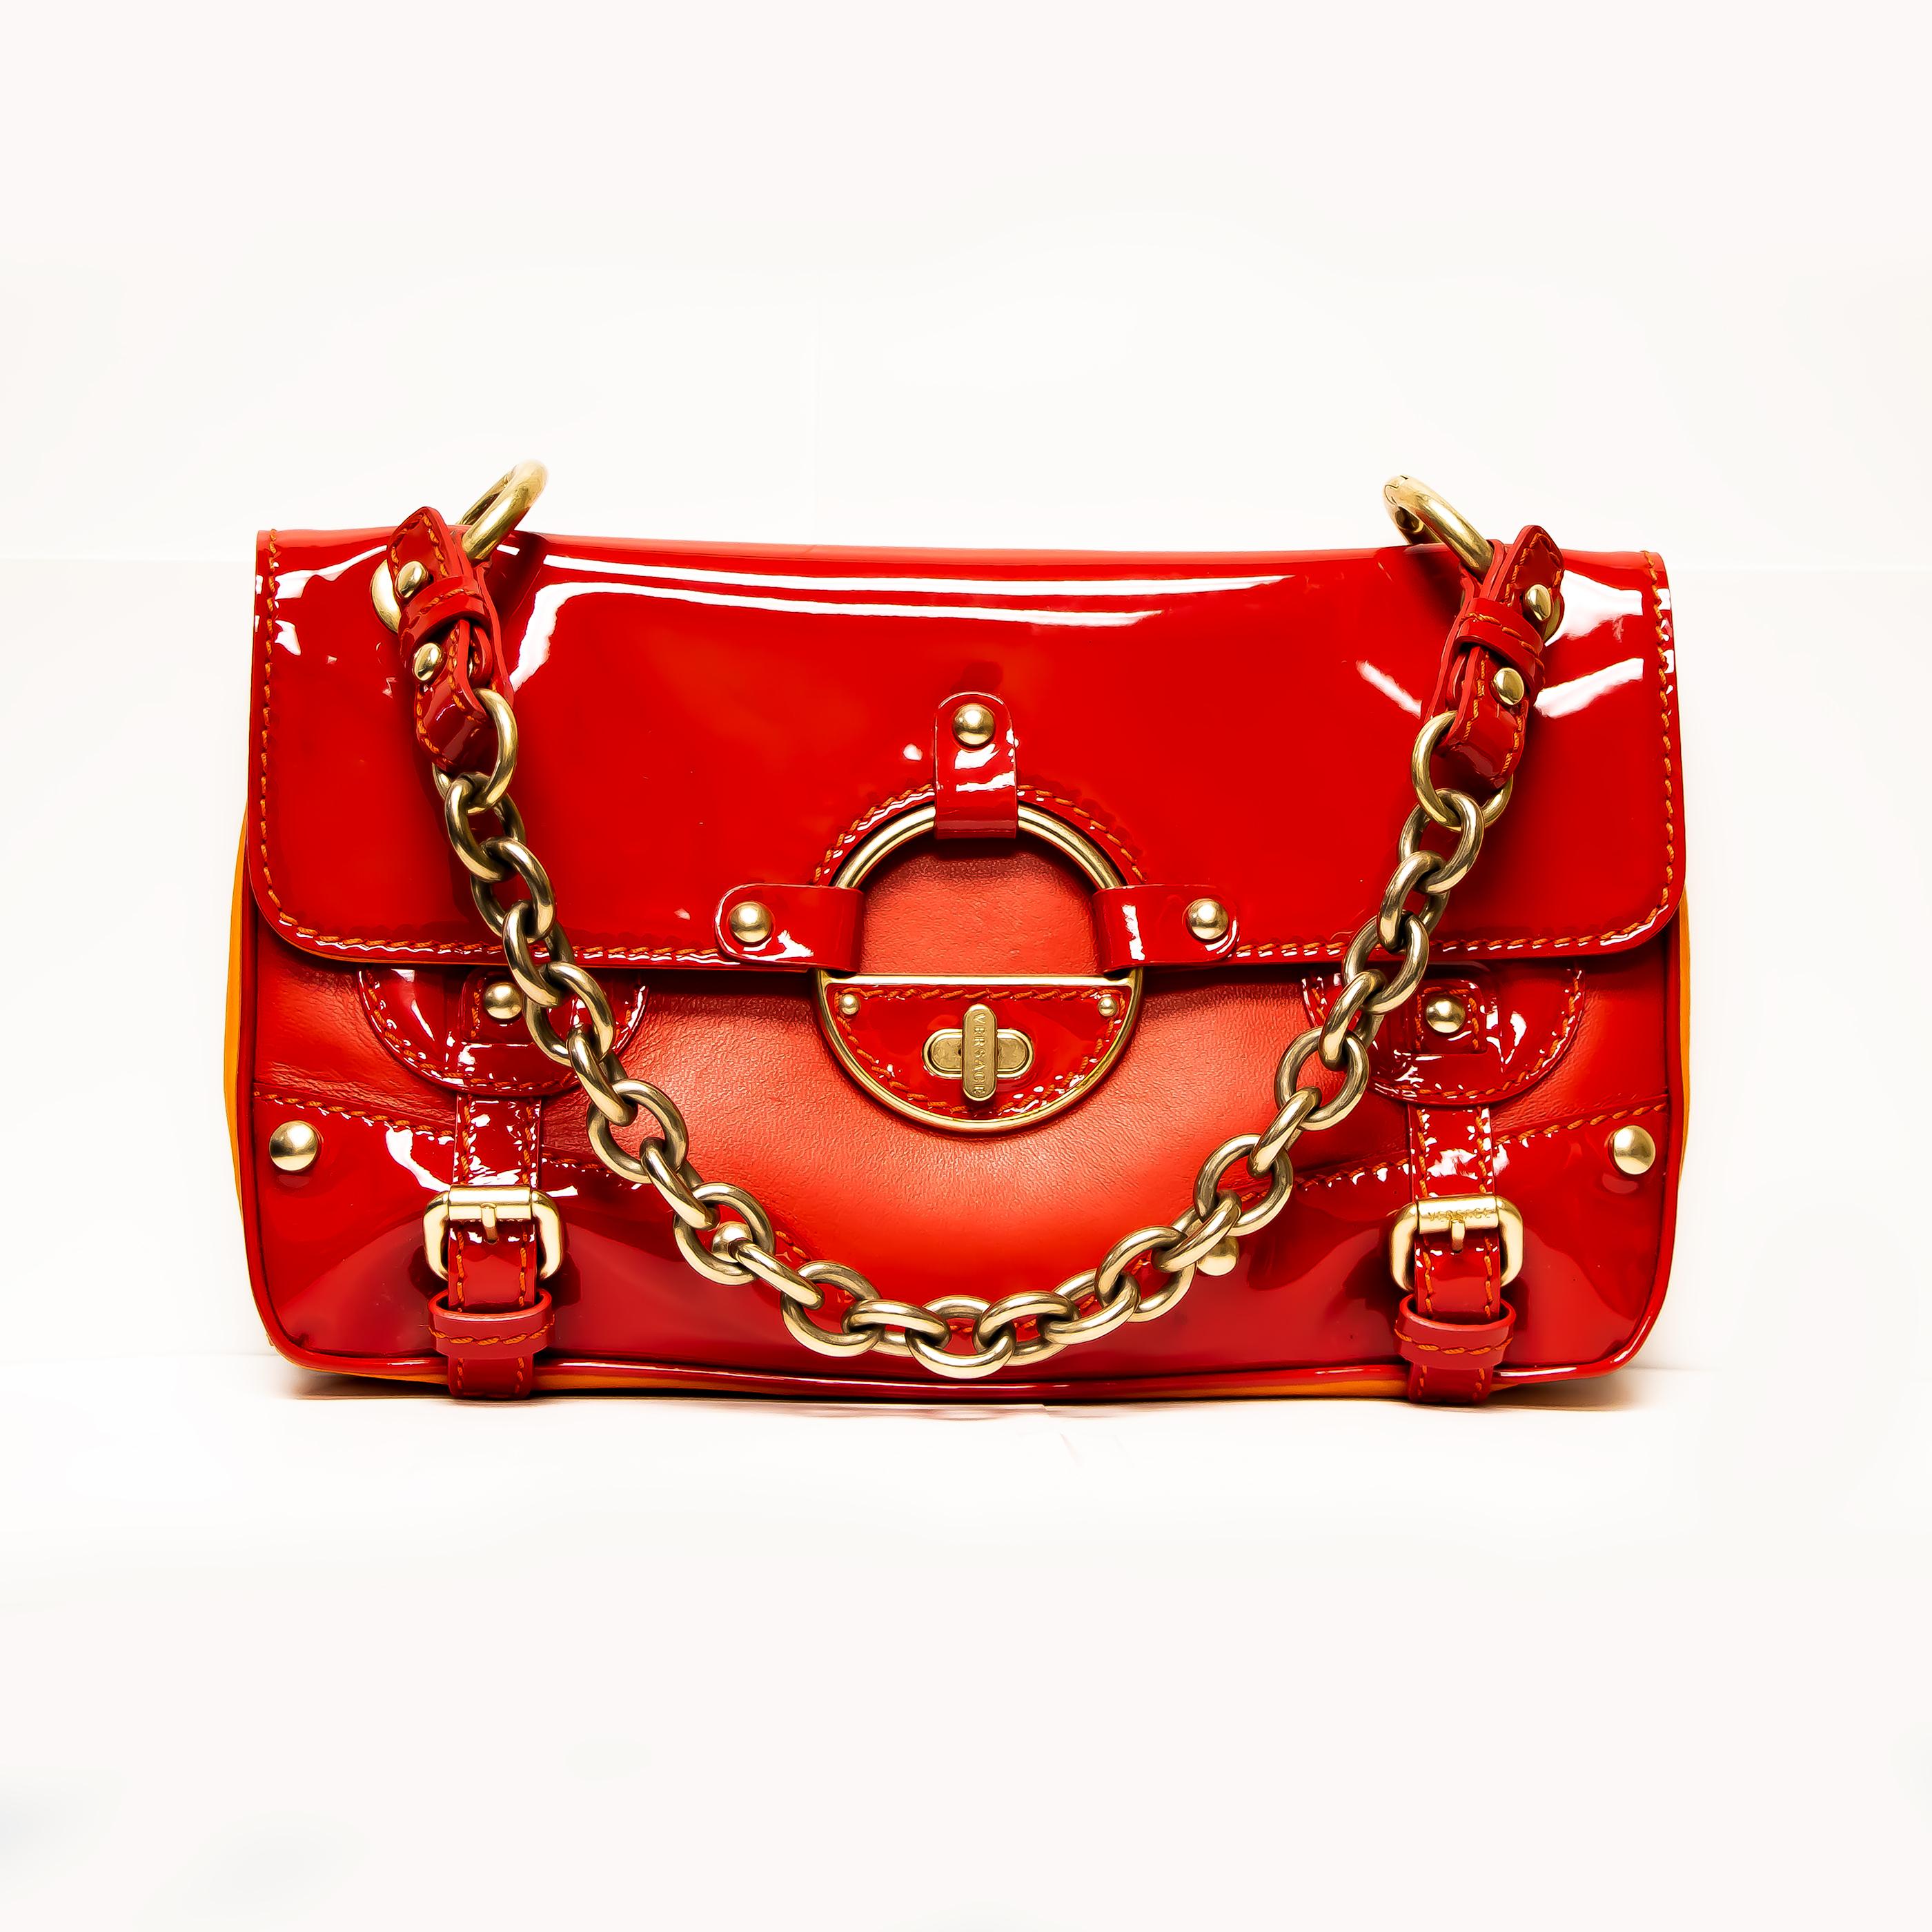 This 2010 Versace Collection Patent Leather Red/Gold/Orange is the kind of bag that can keep you in a smart and fabulous appearance even if going with your simplest ensemble. Its striking appearance exudes feminine appeal with a hint of hot look. It